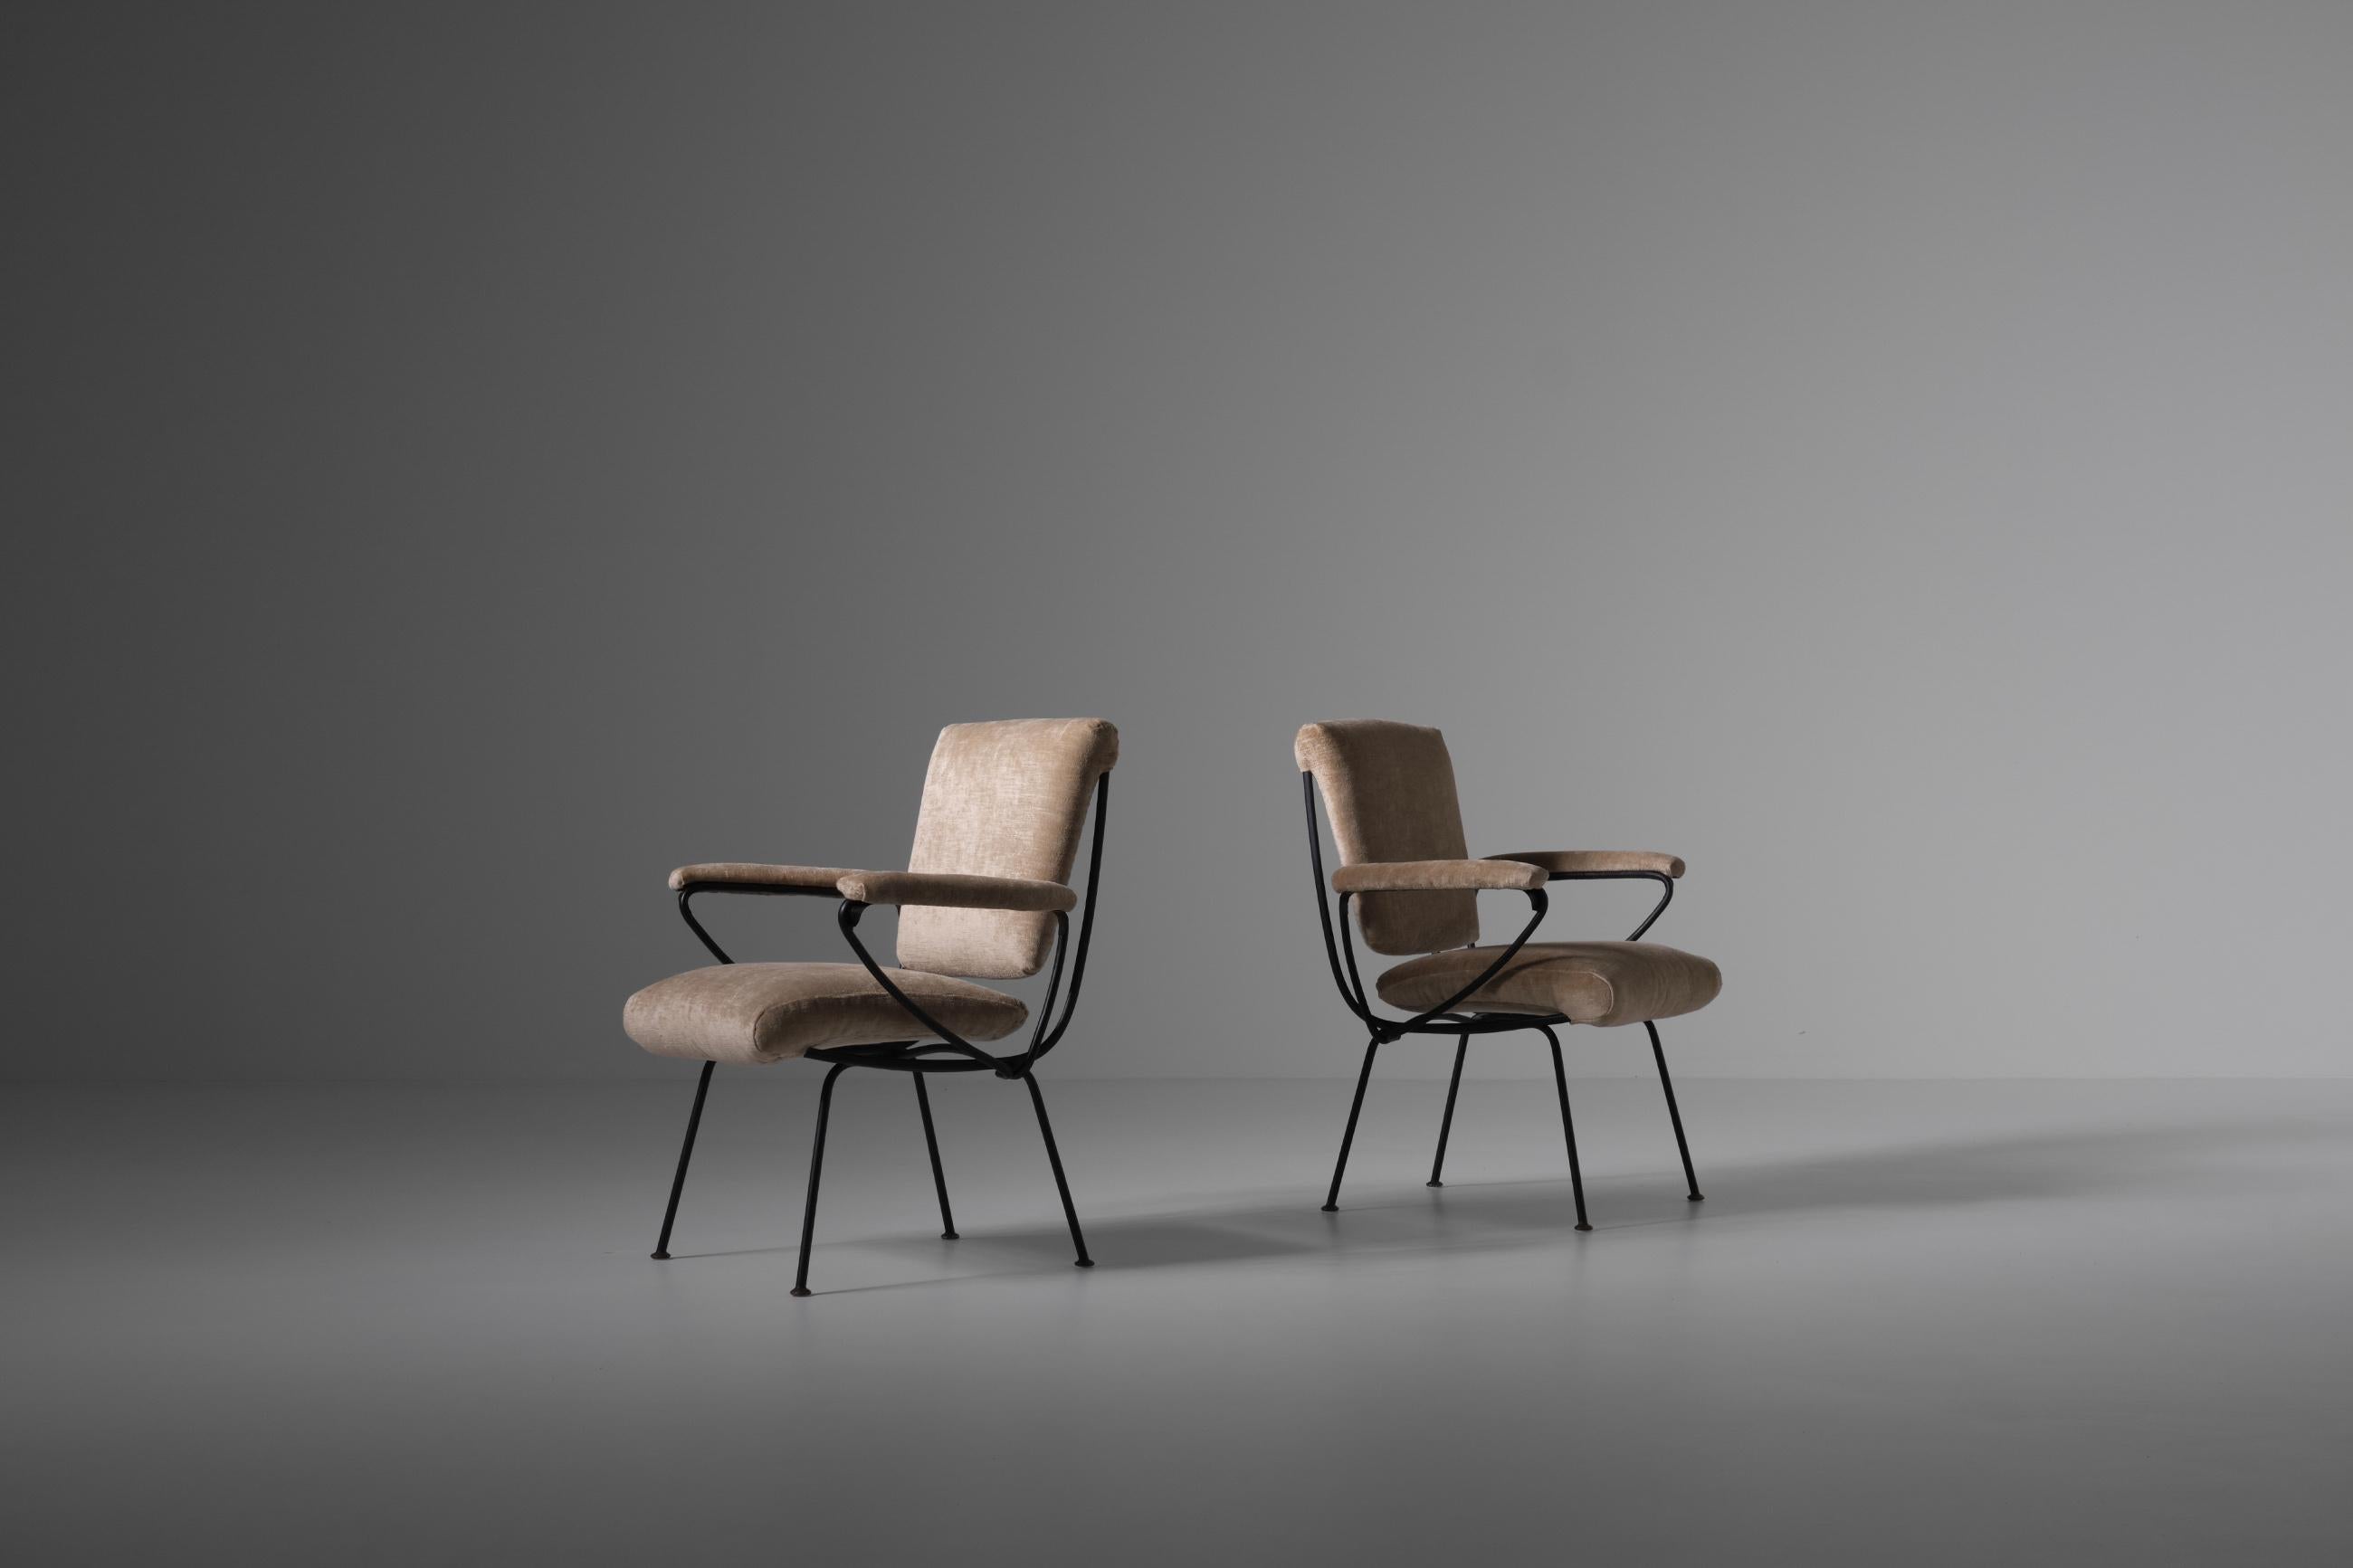 Pair of armchairs model 'DU 24' by Gastone Rinaldi for Rima, Italy 1956. The tubular framing immediately catches the eye and is the signature for this design. The whole frame is made of metal, the seating has a webbing of Pirelli rubber straps. The